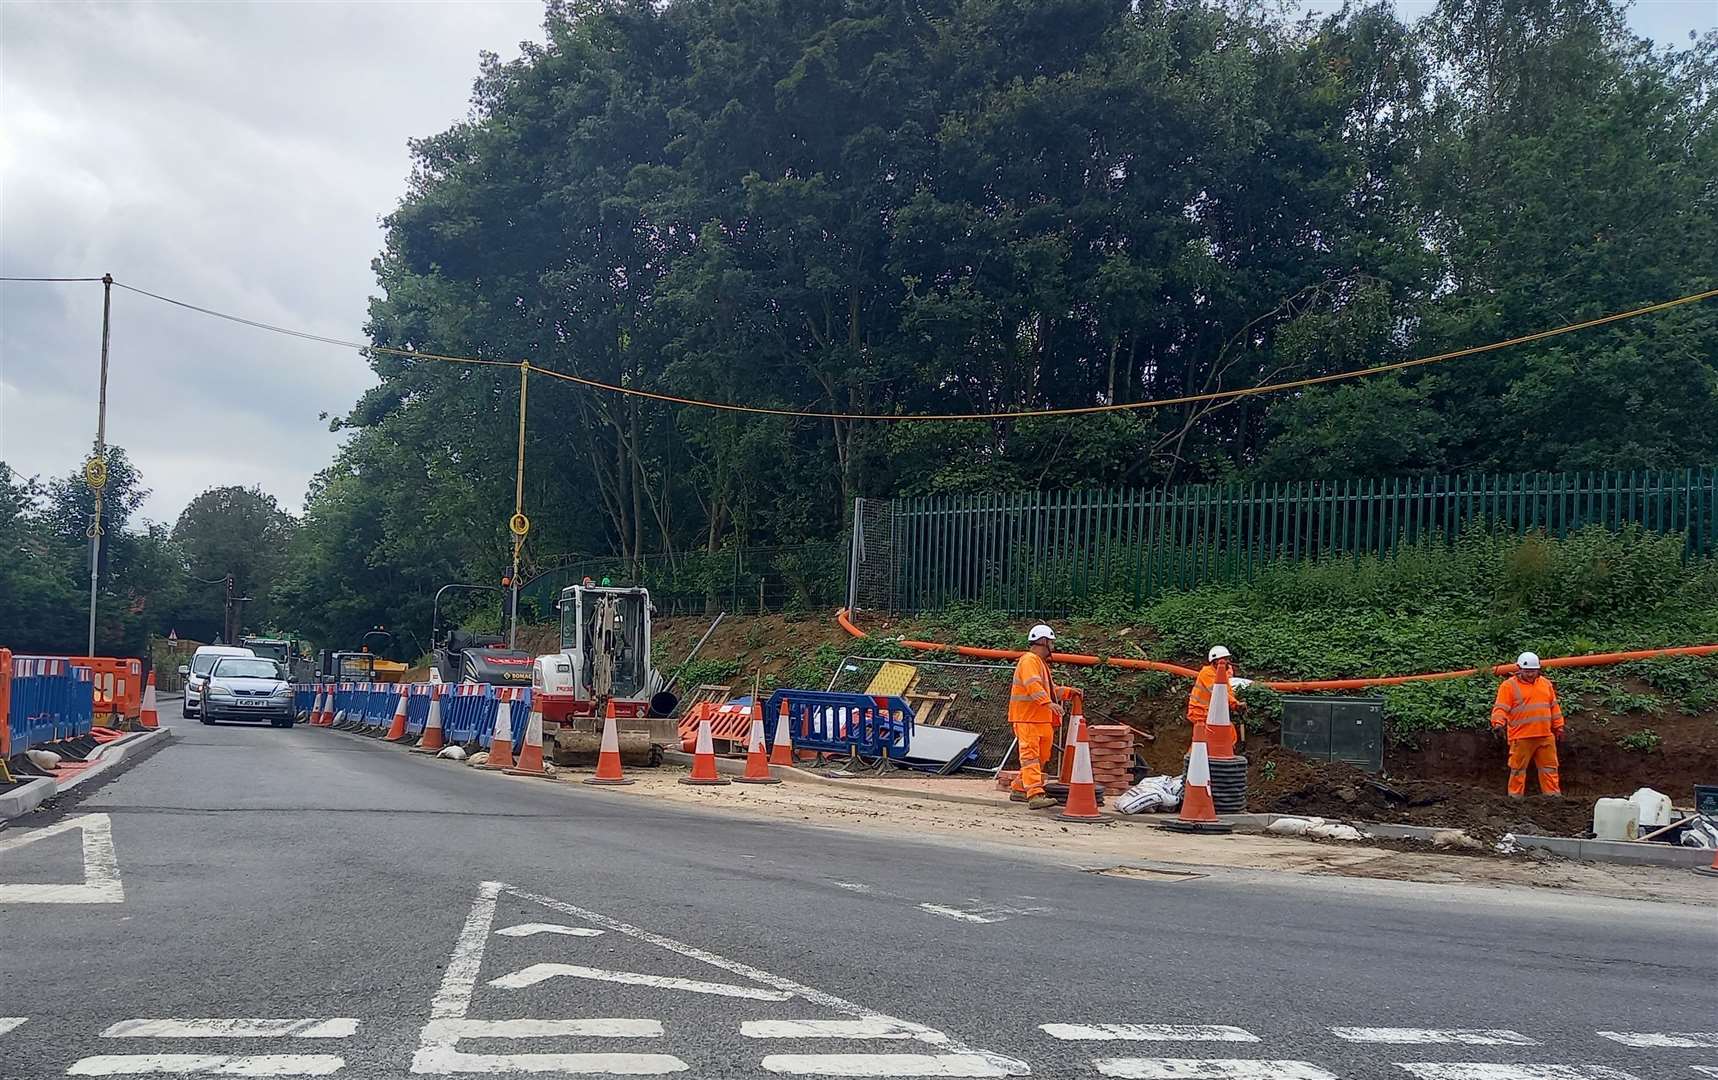 Permanent traffic lights are being installed at the junction